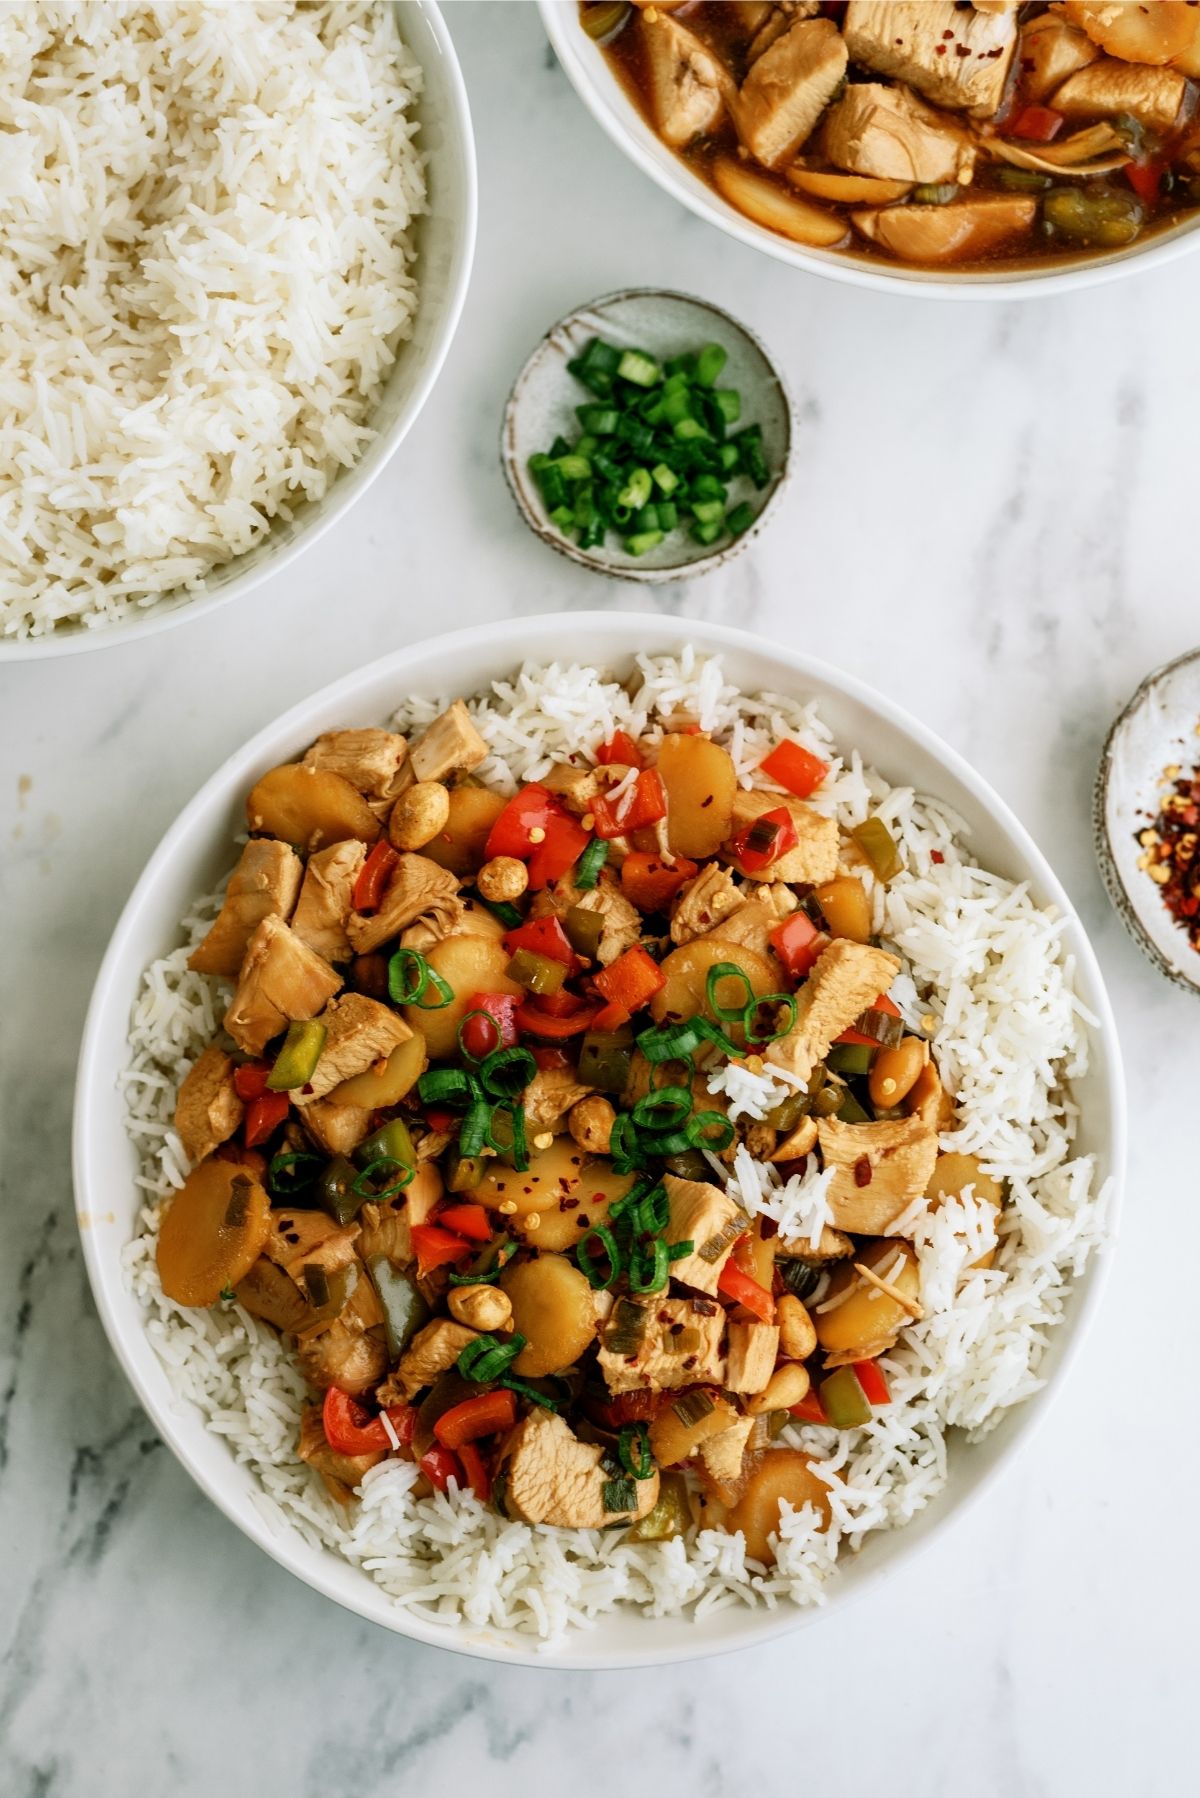 Slow Cooker Kung Pao Chicken from Six Sisters' Stuff